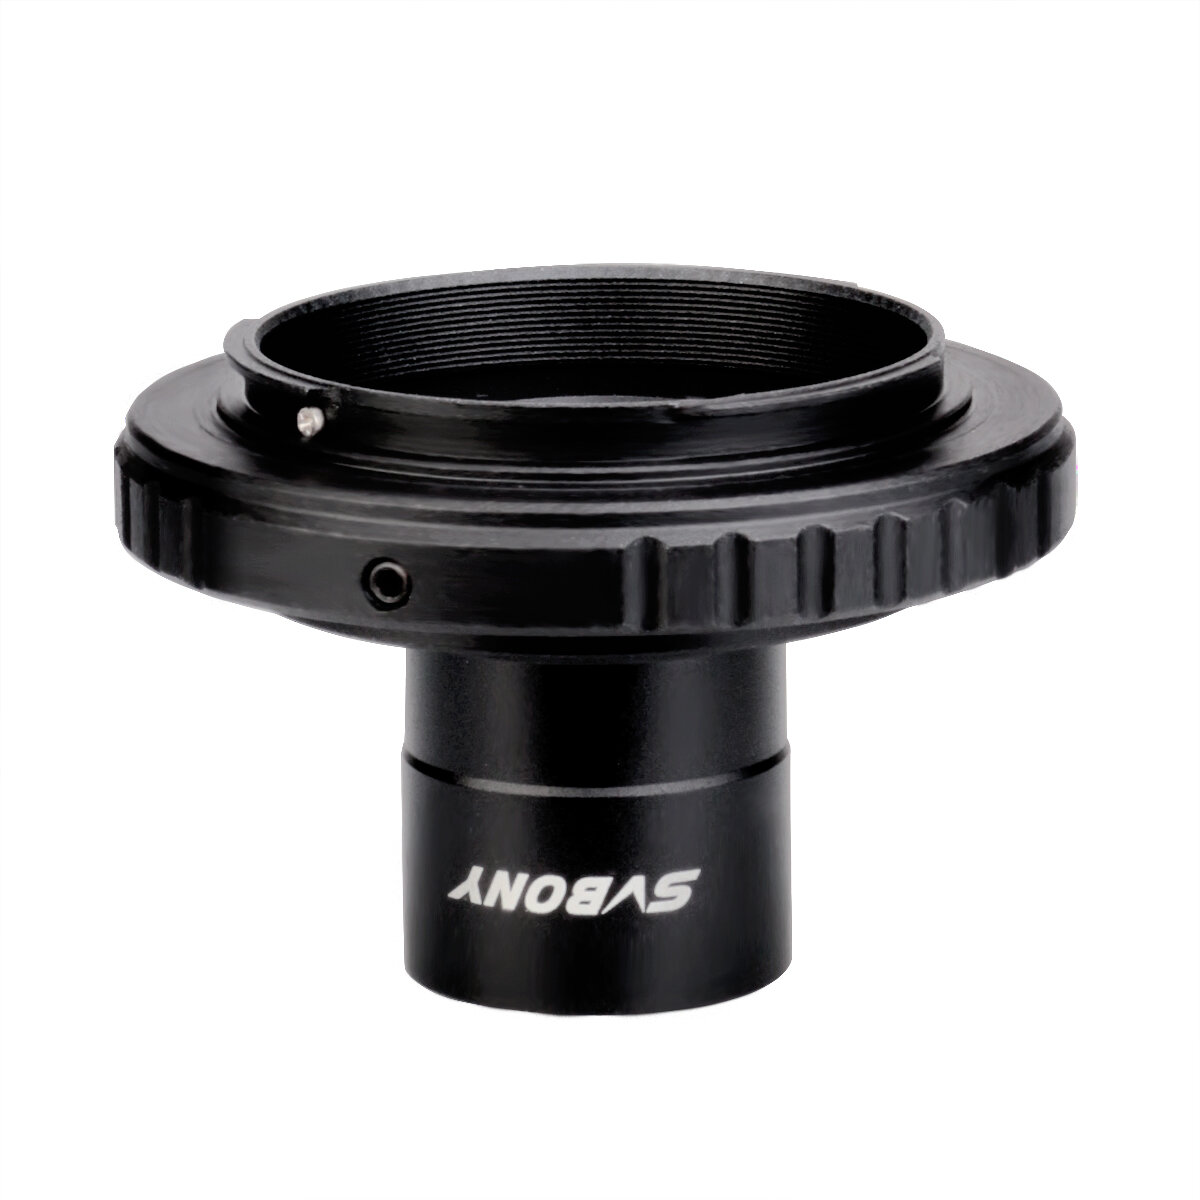 

SVBONY 0.965" to T2 Mount 0.965in Eyepiece Insertion to M42 Prime Telescope Adapter for Nikon SLR Cameras